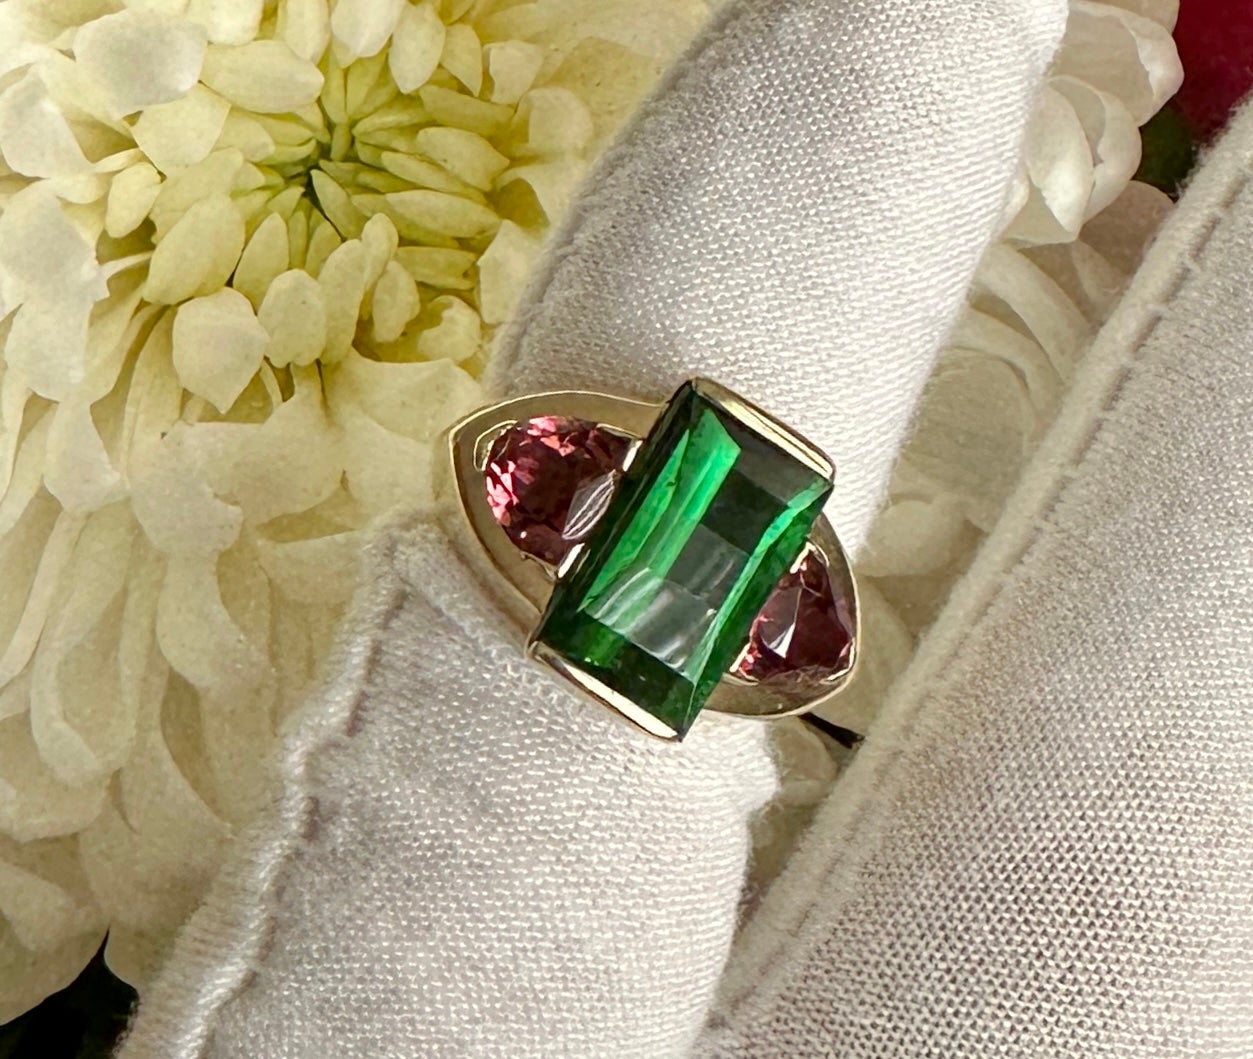 This is a magnificent original Green and Pink Tourmaline Ring in 10 Karat Yellow Gold.  The central Fine Green Tourmaline is emerald cut and is 14mm by 8mm. 
 It is a gorgeous large tourmaline of magnificent color and cut.  On either side are two